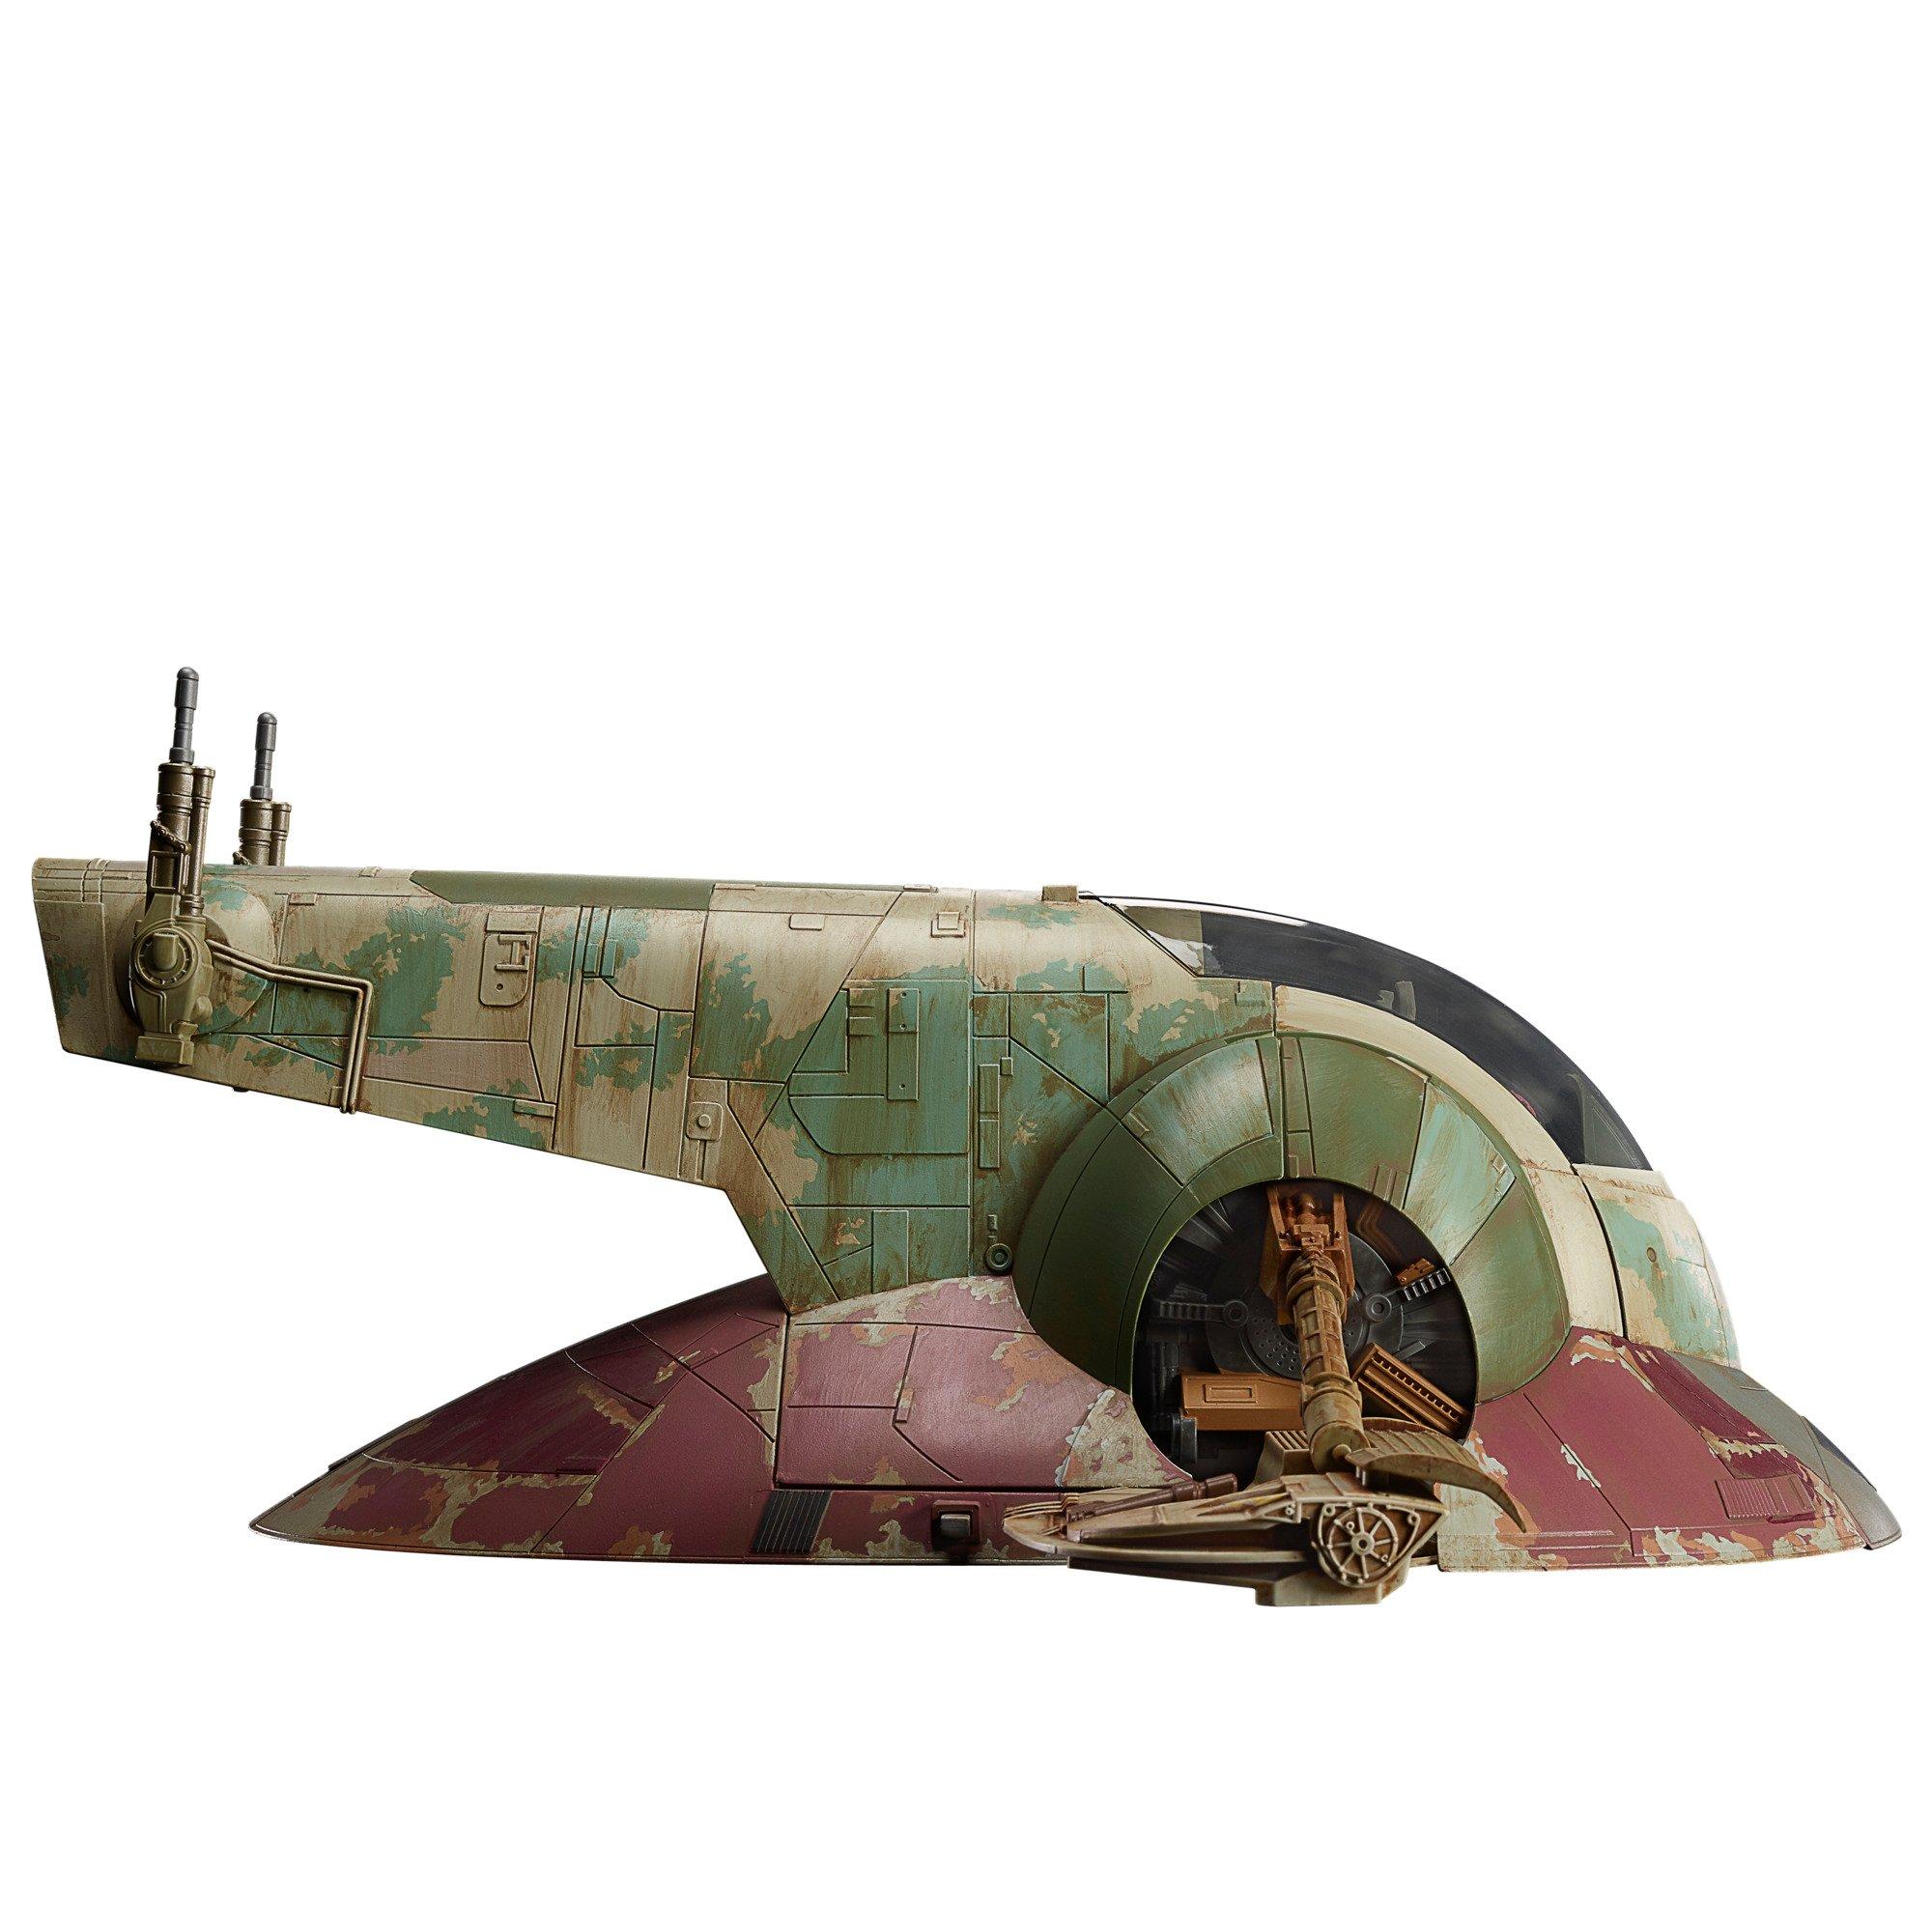 list item 6 of 16 Hasbro Star Wars The Vintage Collection The Book of Boba Fett - Boba Fett Figure and Starship Replica